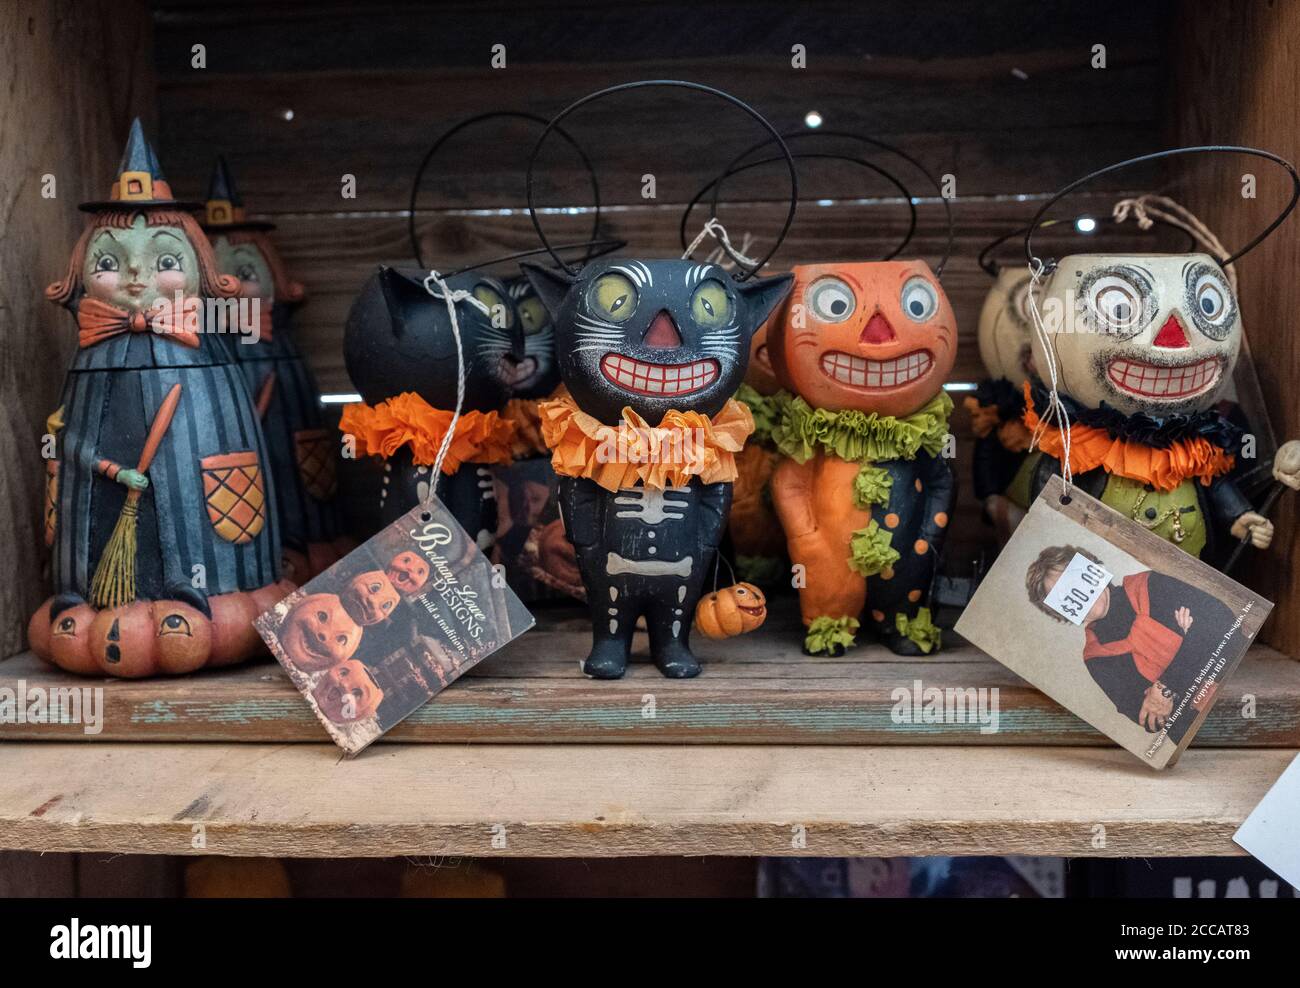 artwork at the 'Stranger Factory' in Nob Hill, Albuquerque, New Mexico    [ Halloween Buckethead Characters by Bethany Lowe ] Stock Photo